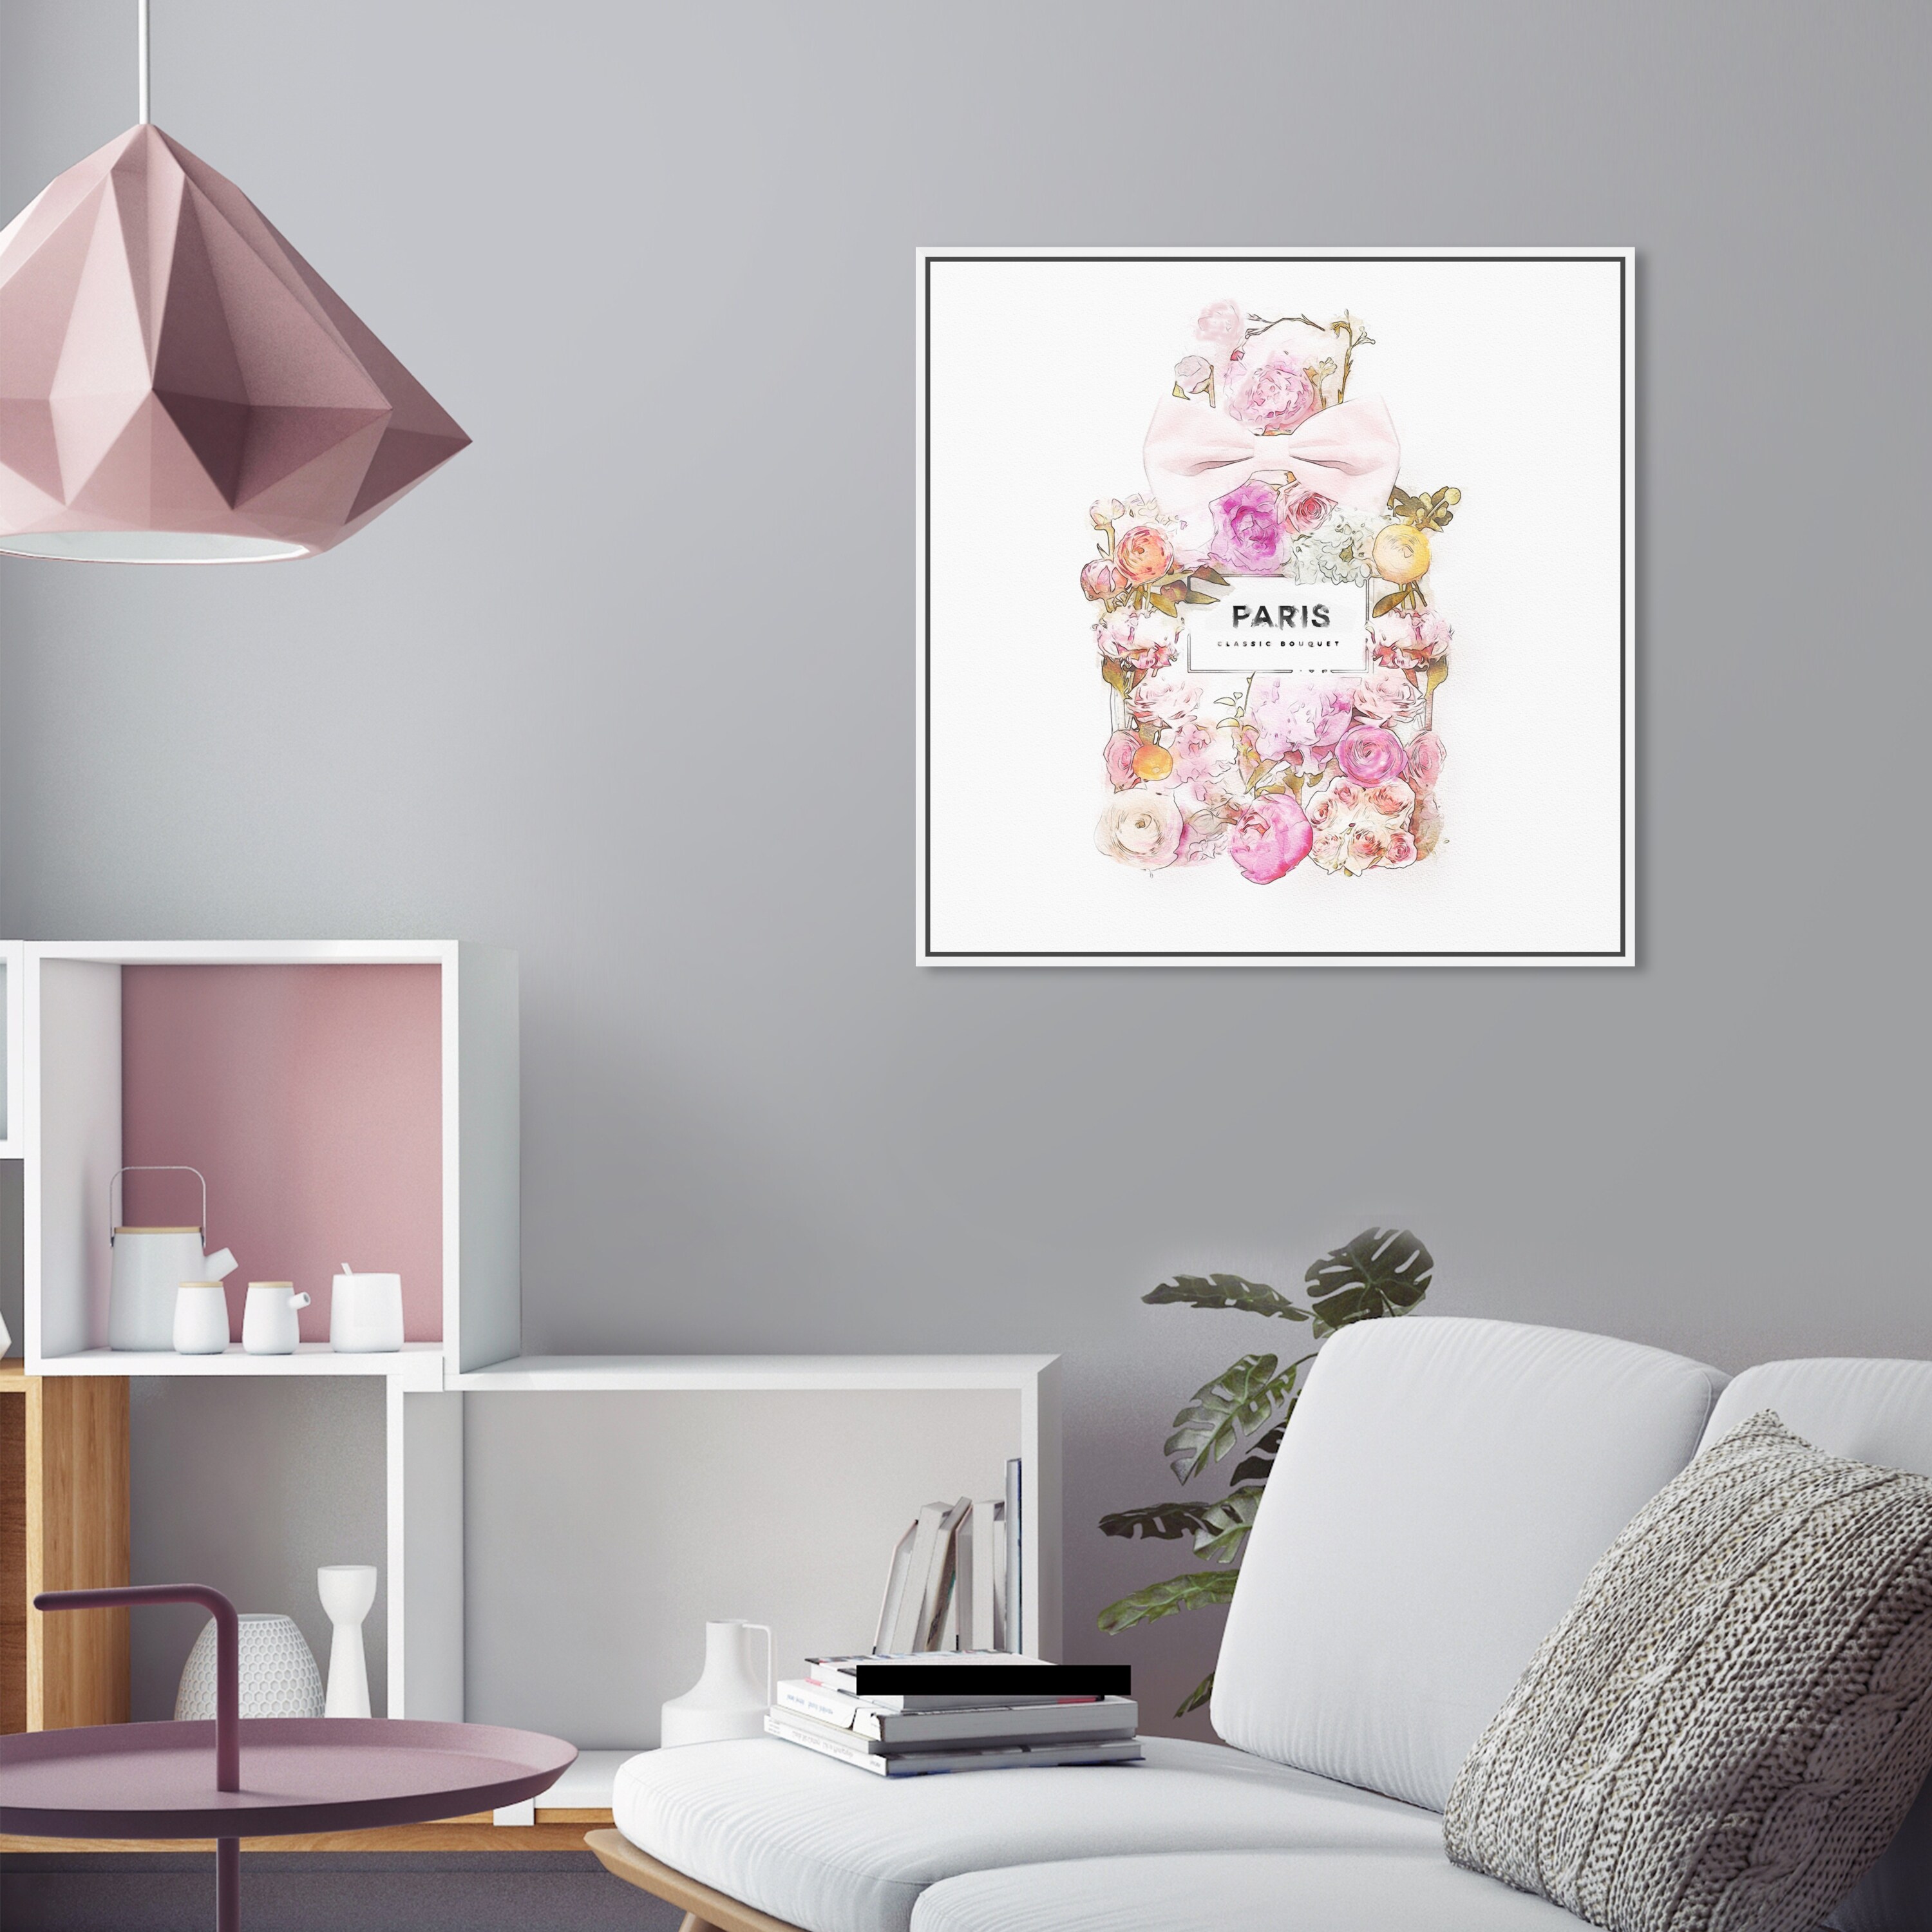 Oliver Gal 'Pairs Bouquet' Fashion and Glam Wall Art Framed Canvas Print  Perfumes - Pink, White - Bed Bath & Beyond - 32481382